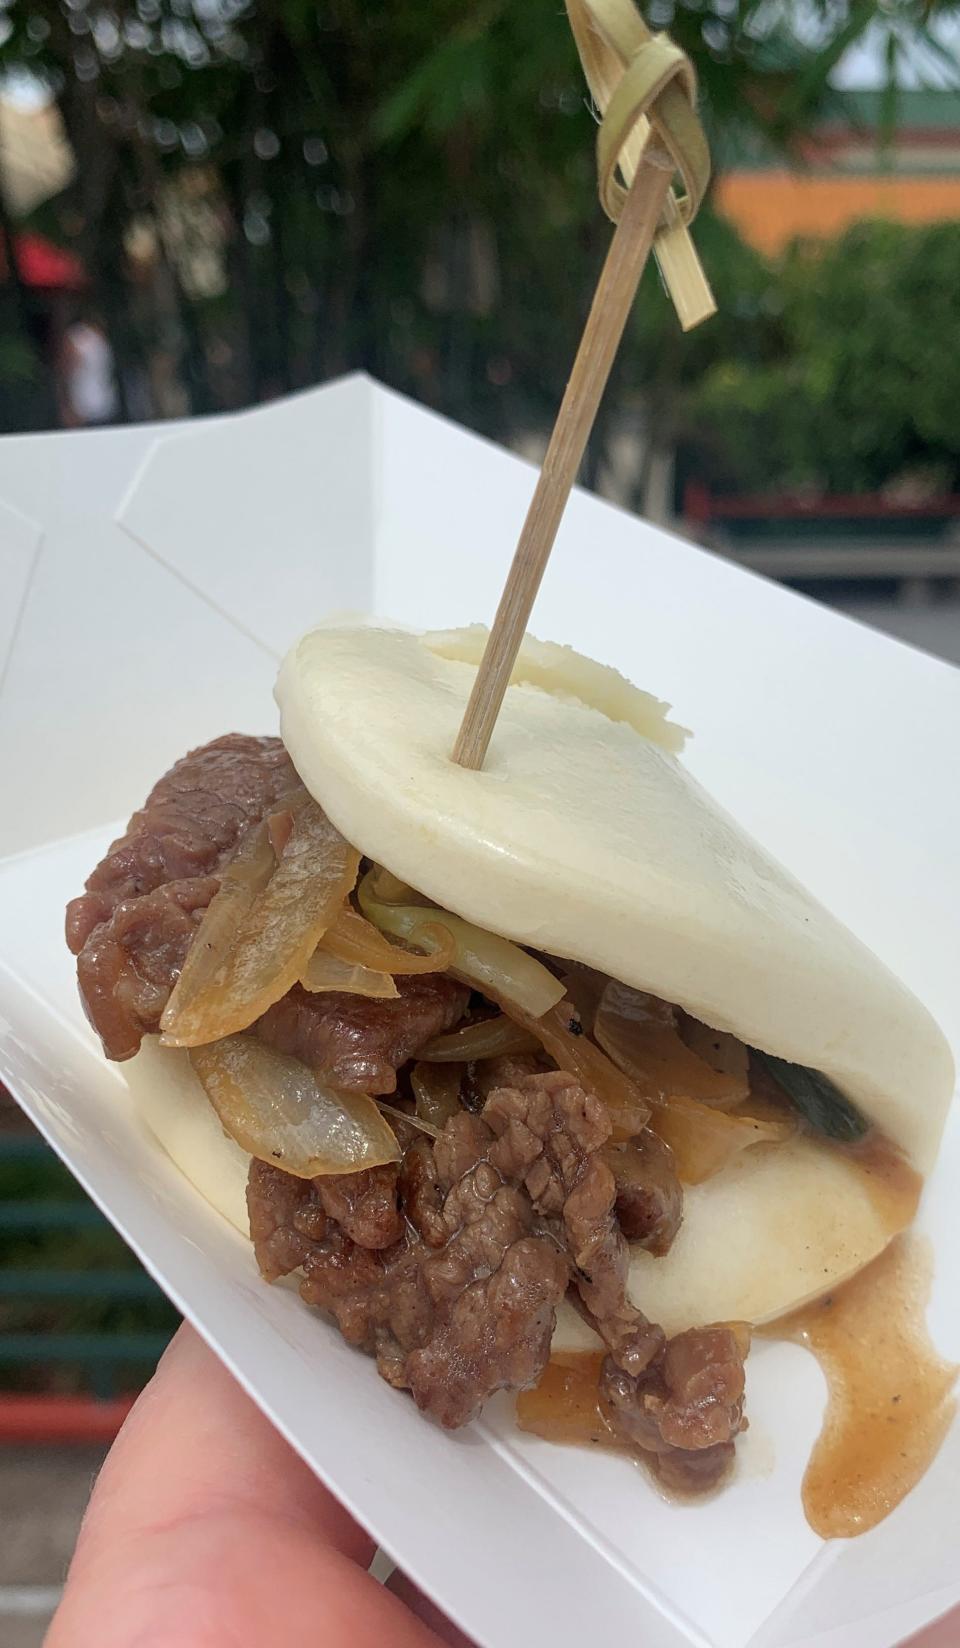 The Mongolian beef bao bun is one of the options at the China kitchen at the EPCOT International Food & Wine Festival.